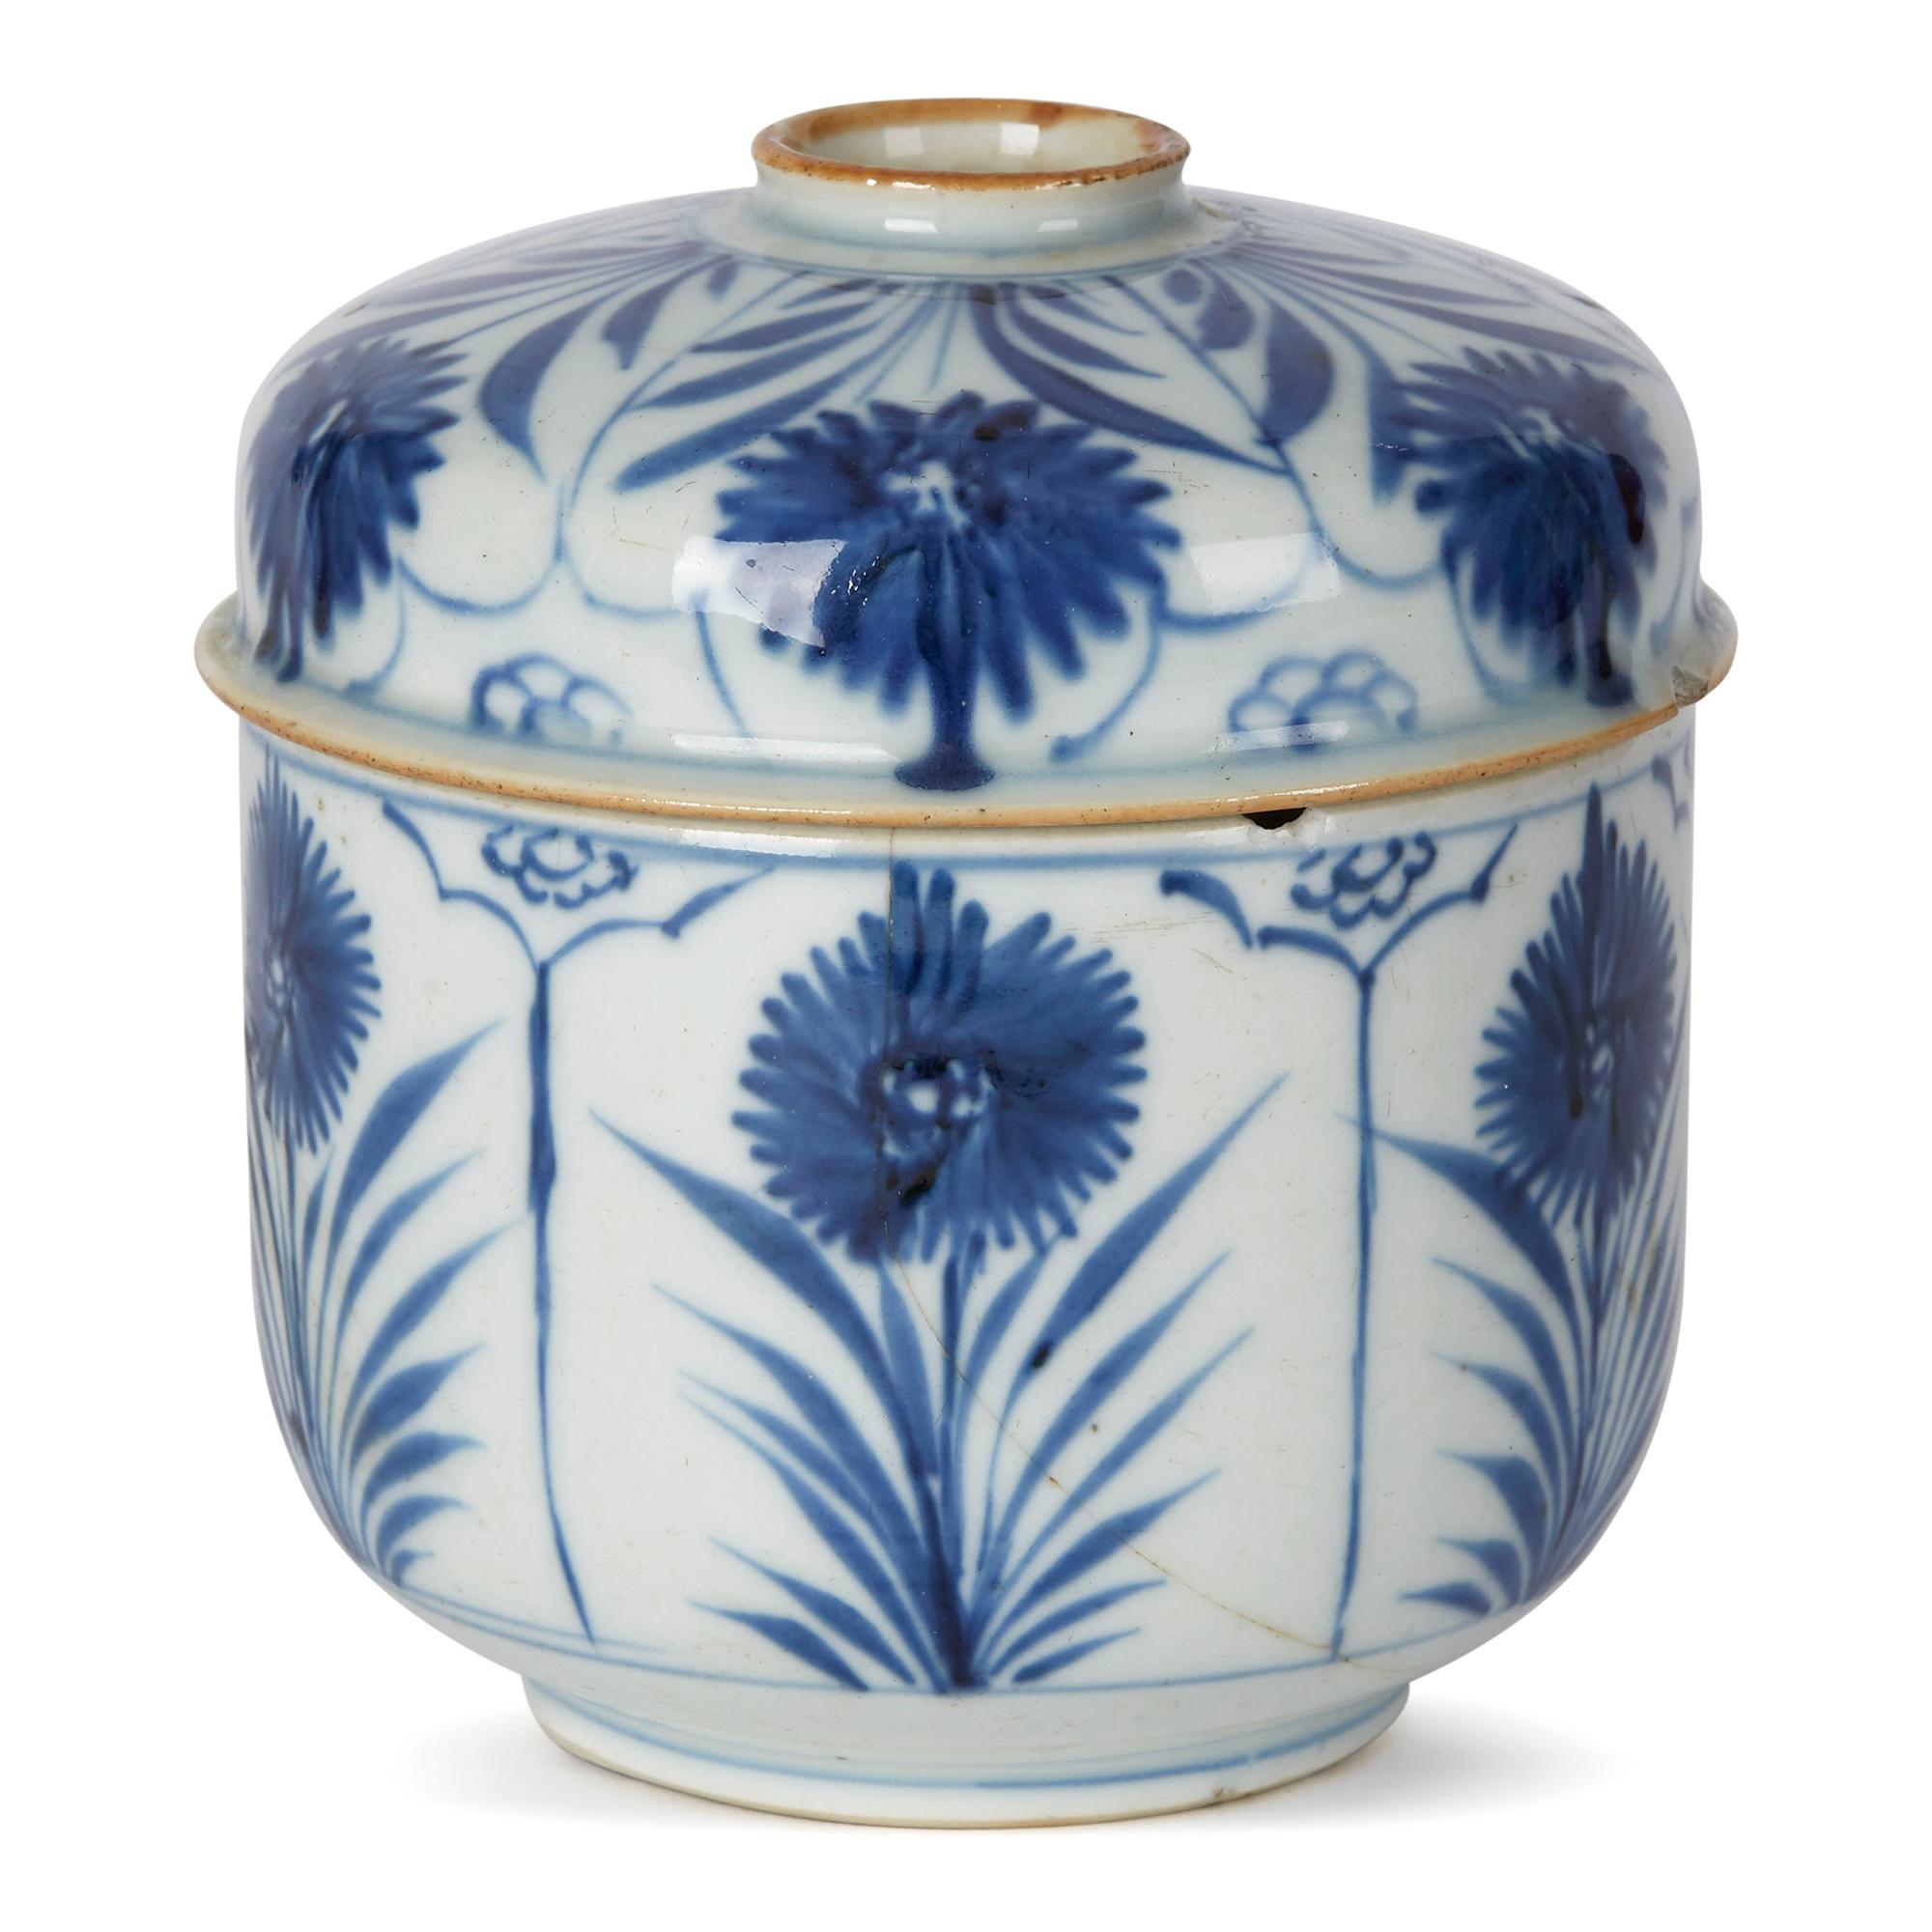 A fine antique Chinese export porcelain lidded pot and is well decorated in underglaze blue with hand painted blooms on tall leafy stems set within panels around the body and cover. The cover with a raised rounded handled with a brown stained rim.